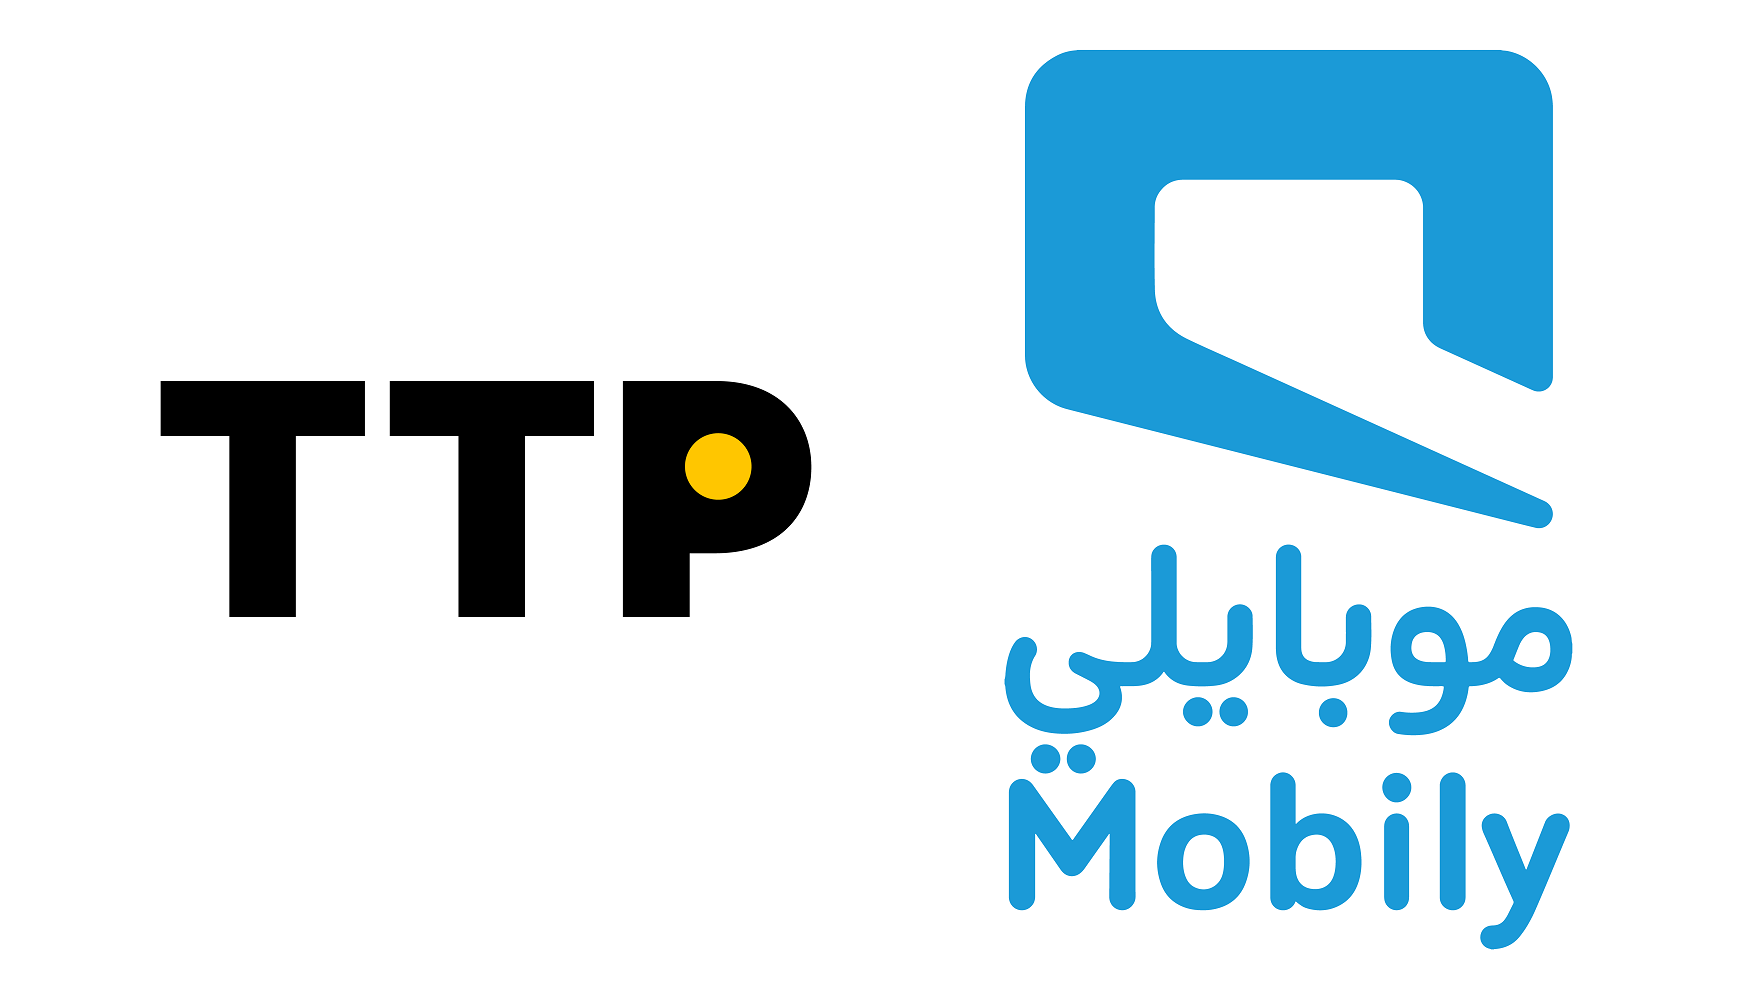 Mobily Appoints TTP as Creative Partner in KSA